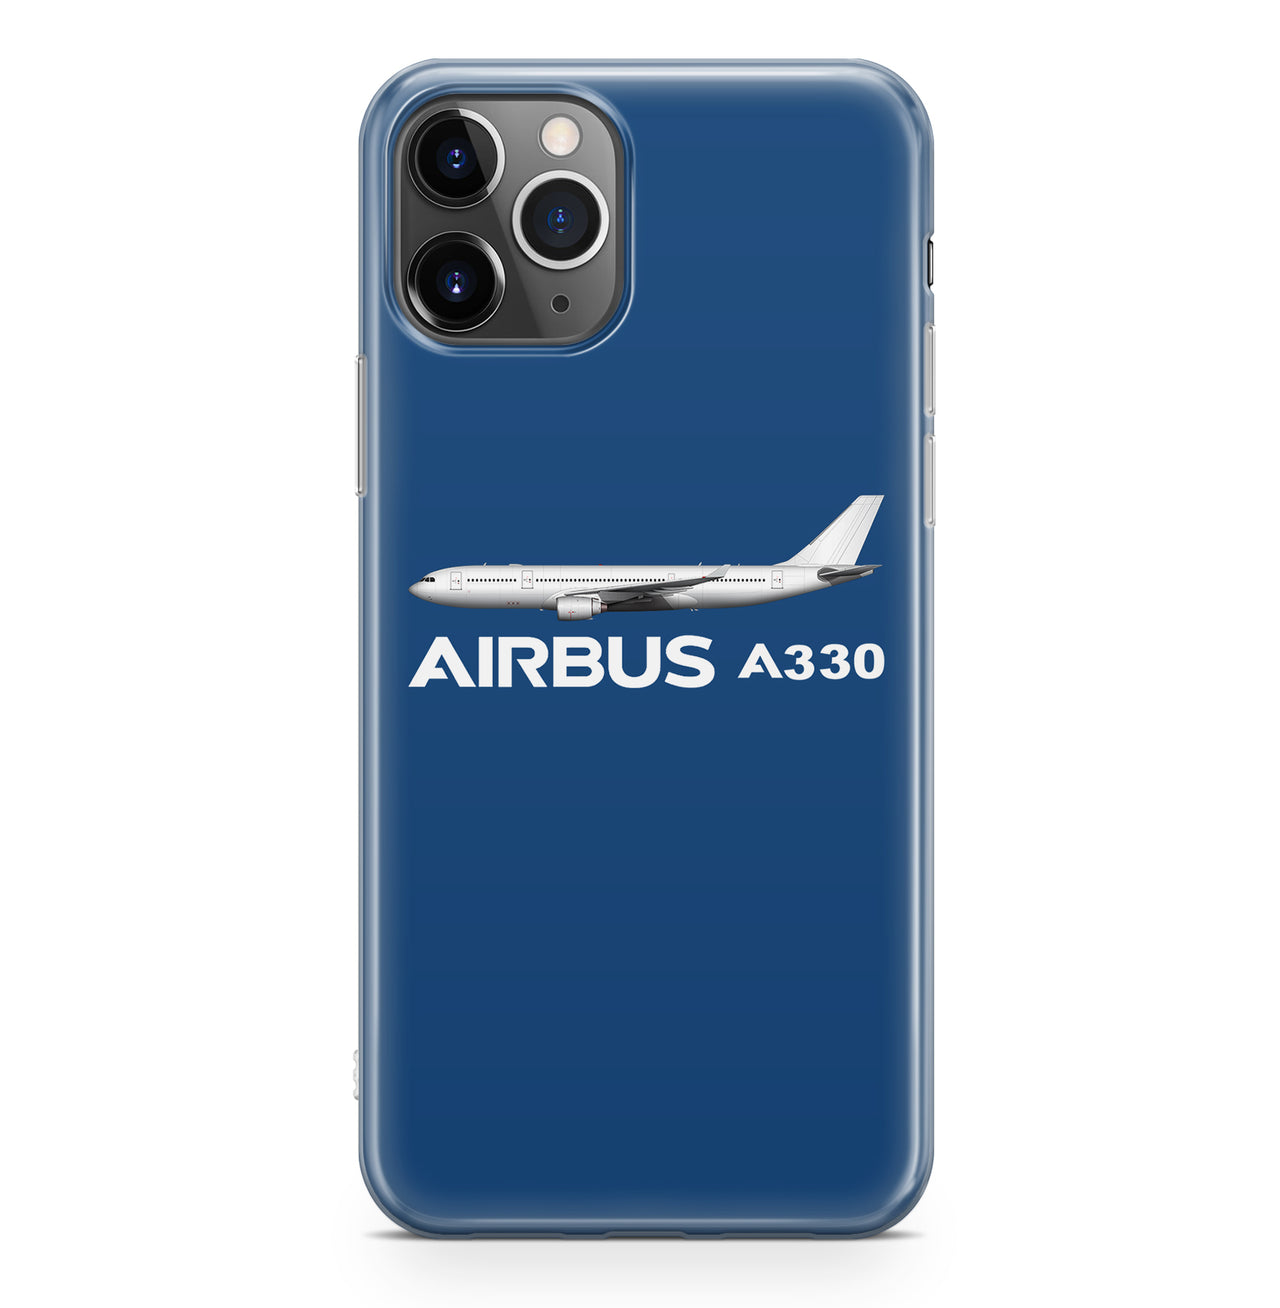 The Airbus A330 Designed iPhone Cases